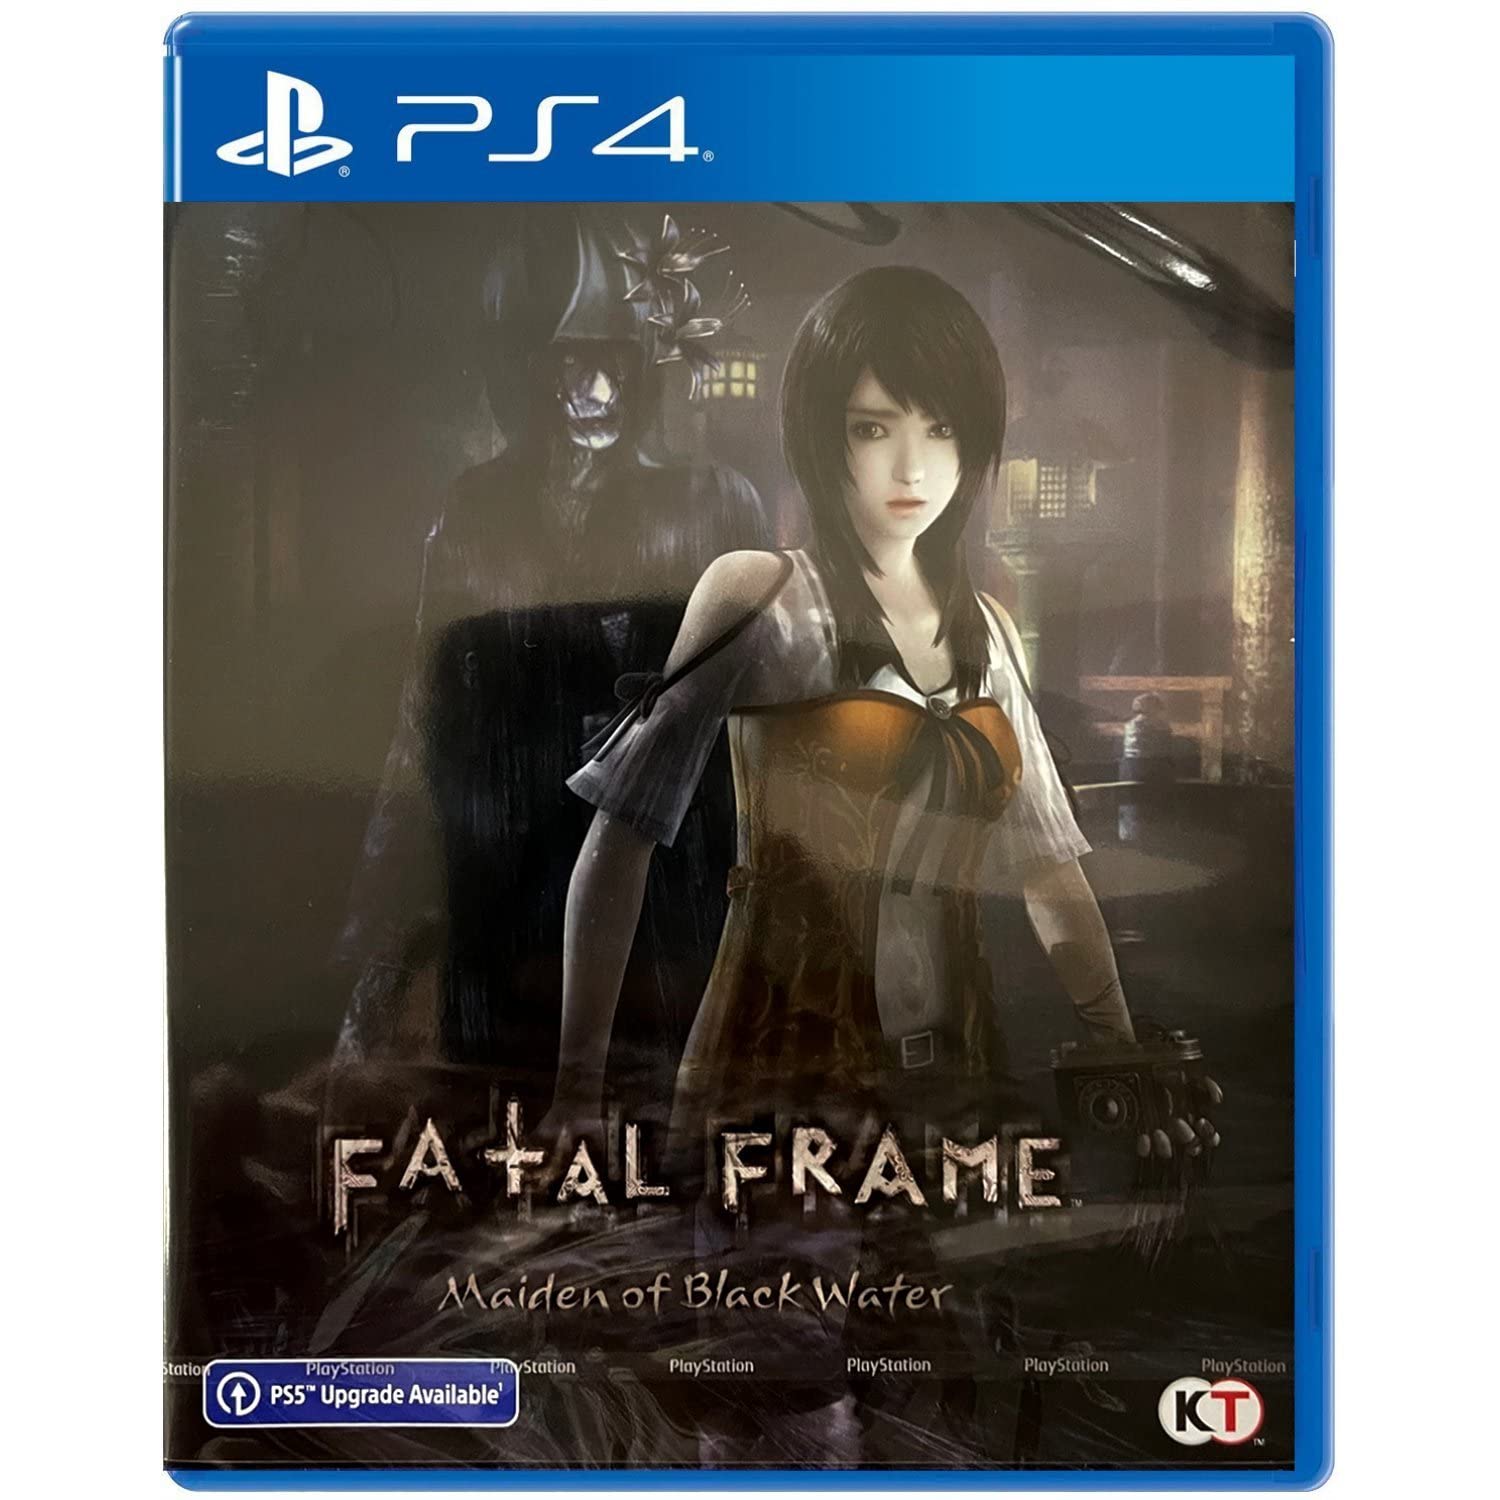 Fatal Frame Maiden of the Black Water